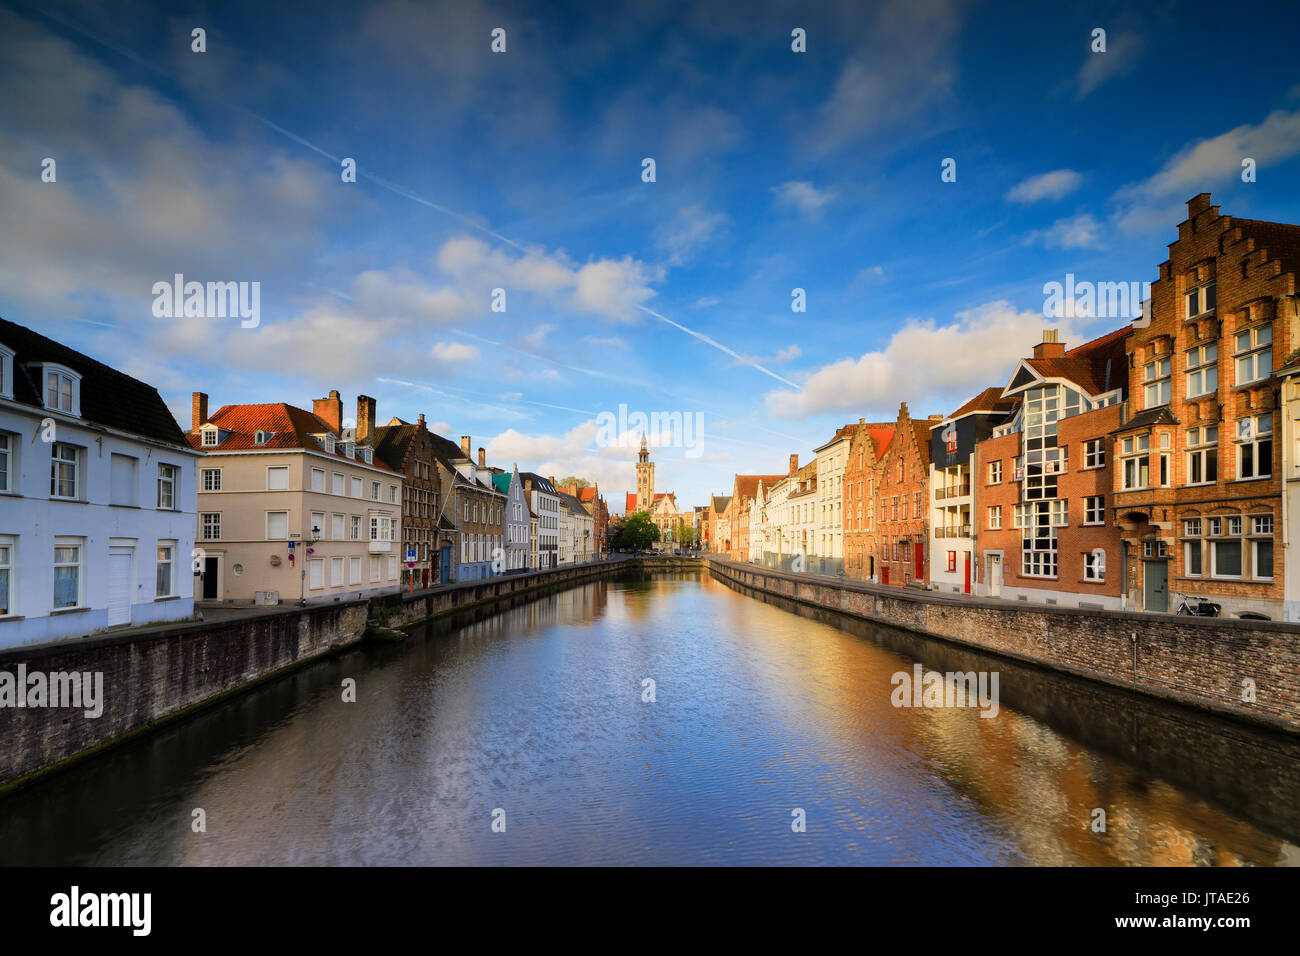 Bright sky at dawn on historic buildings and houses of city centre reflected in the canal, Bruges, West Flanders, Belgium Stock Photo